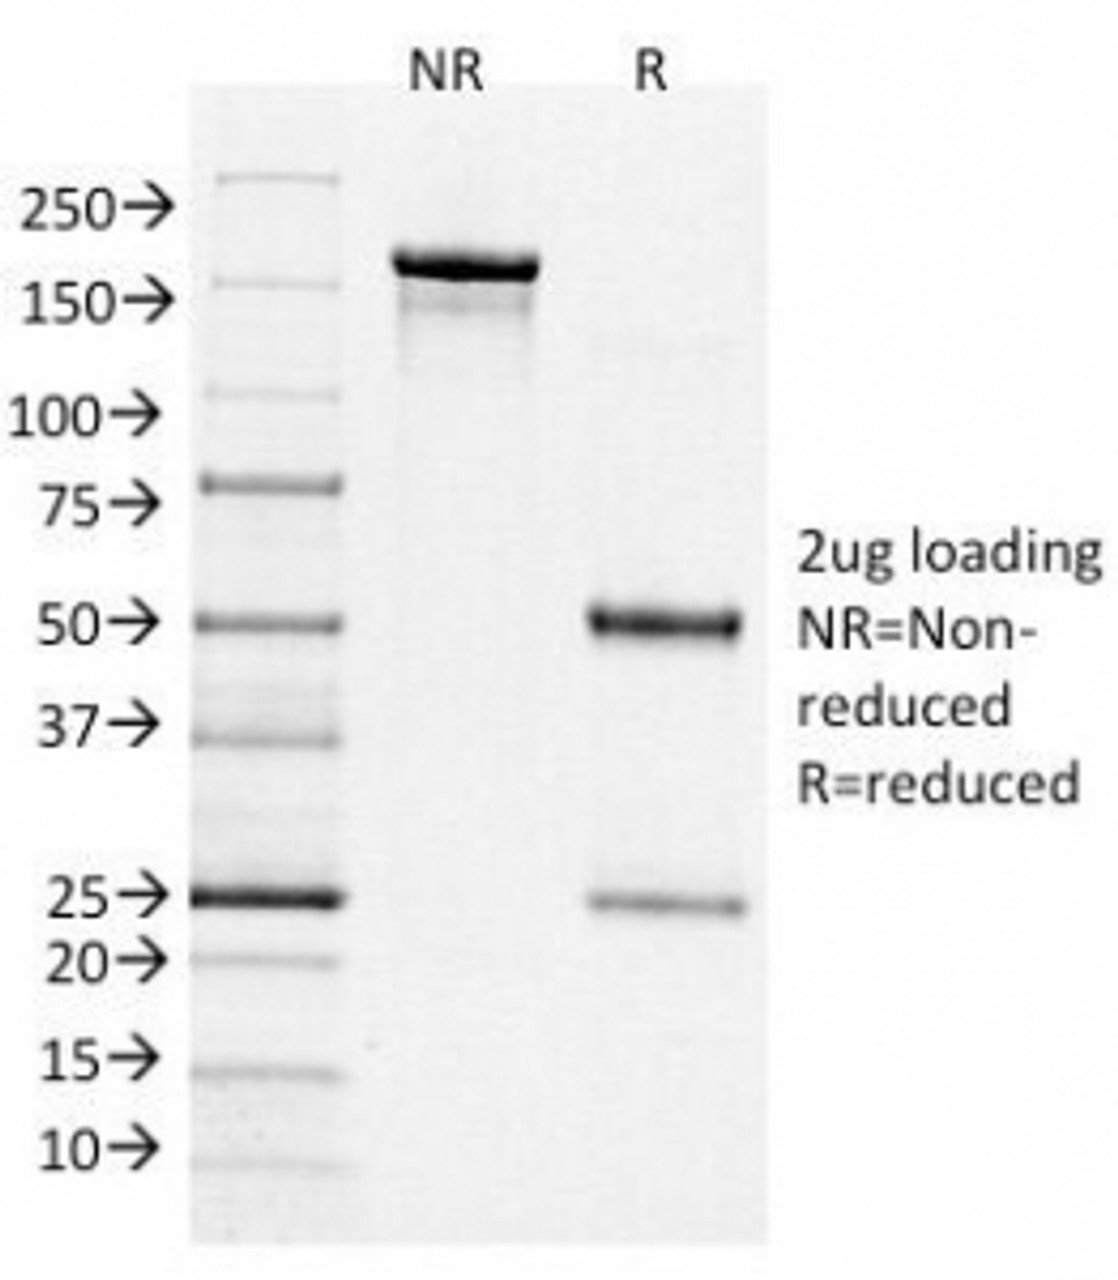 SDS-PAGE Analysis of Purified, BSA-Free Bcl6 Antibody (clone BCL6/1526) . Confirmation of Integrity and Purity of the Antibody.